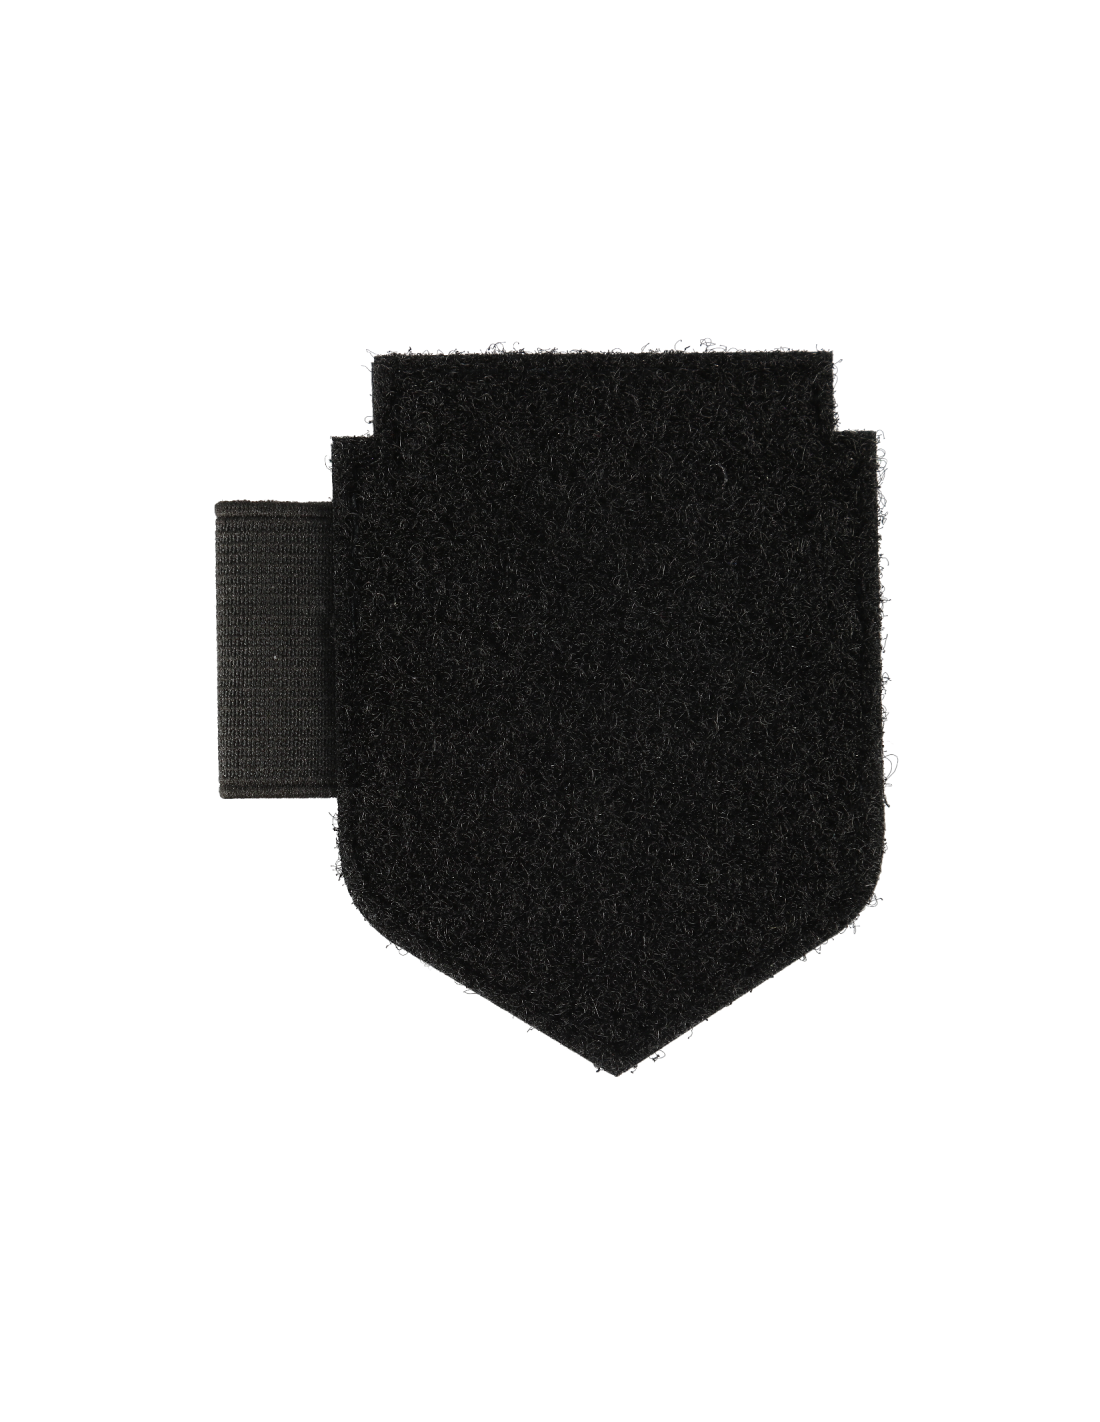 Ecusson-Patch-velcro -thermocollant-SST-FORMATEUR-Fabrication-Française-NathaliEmbroidery